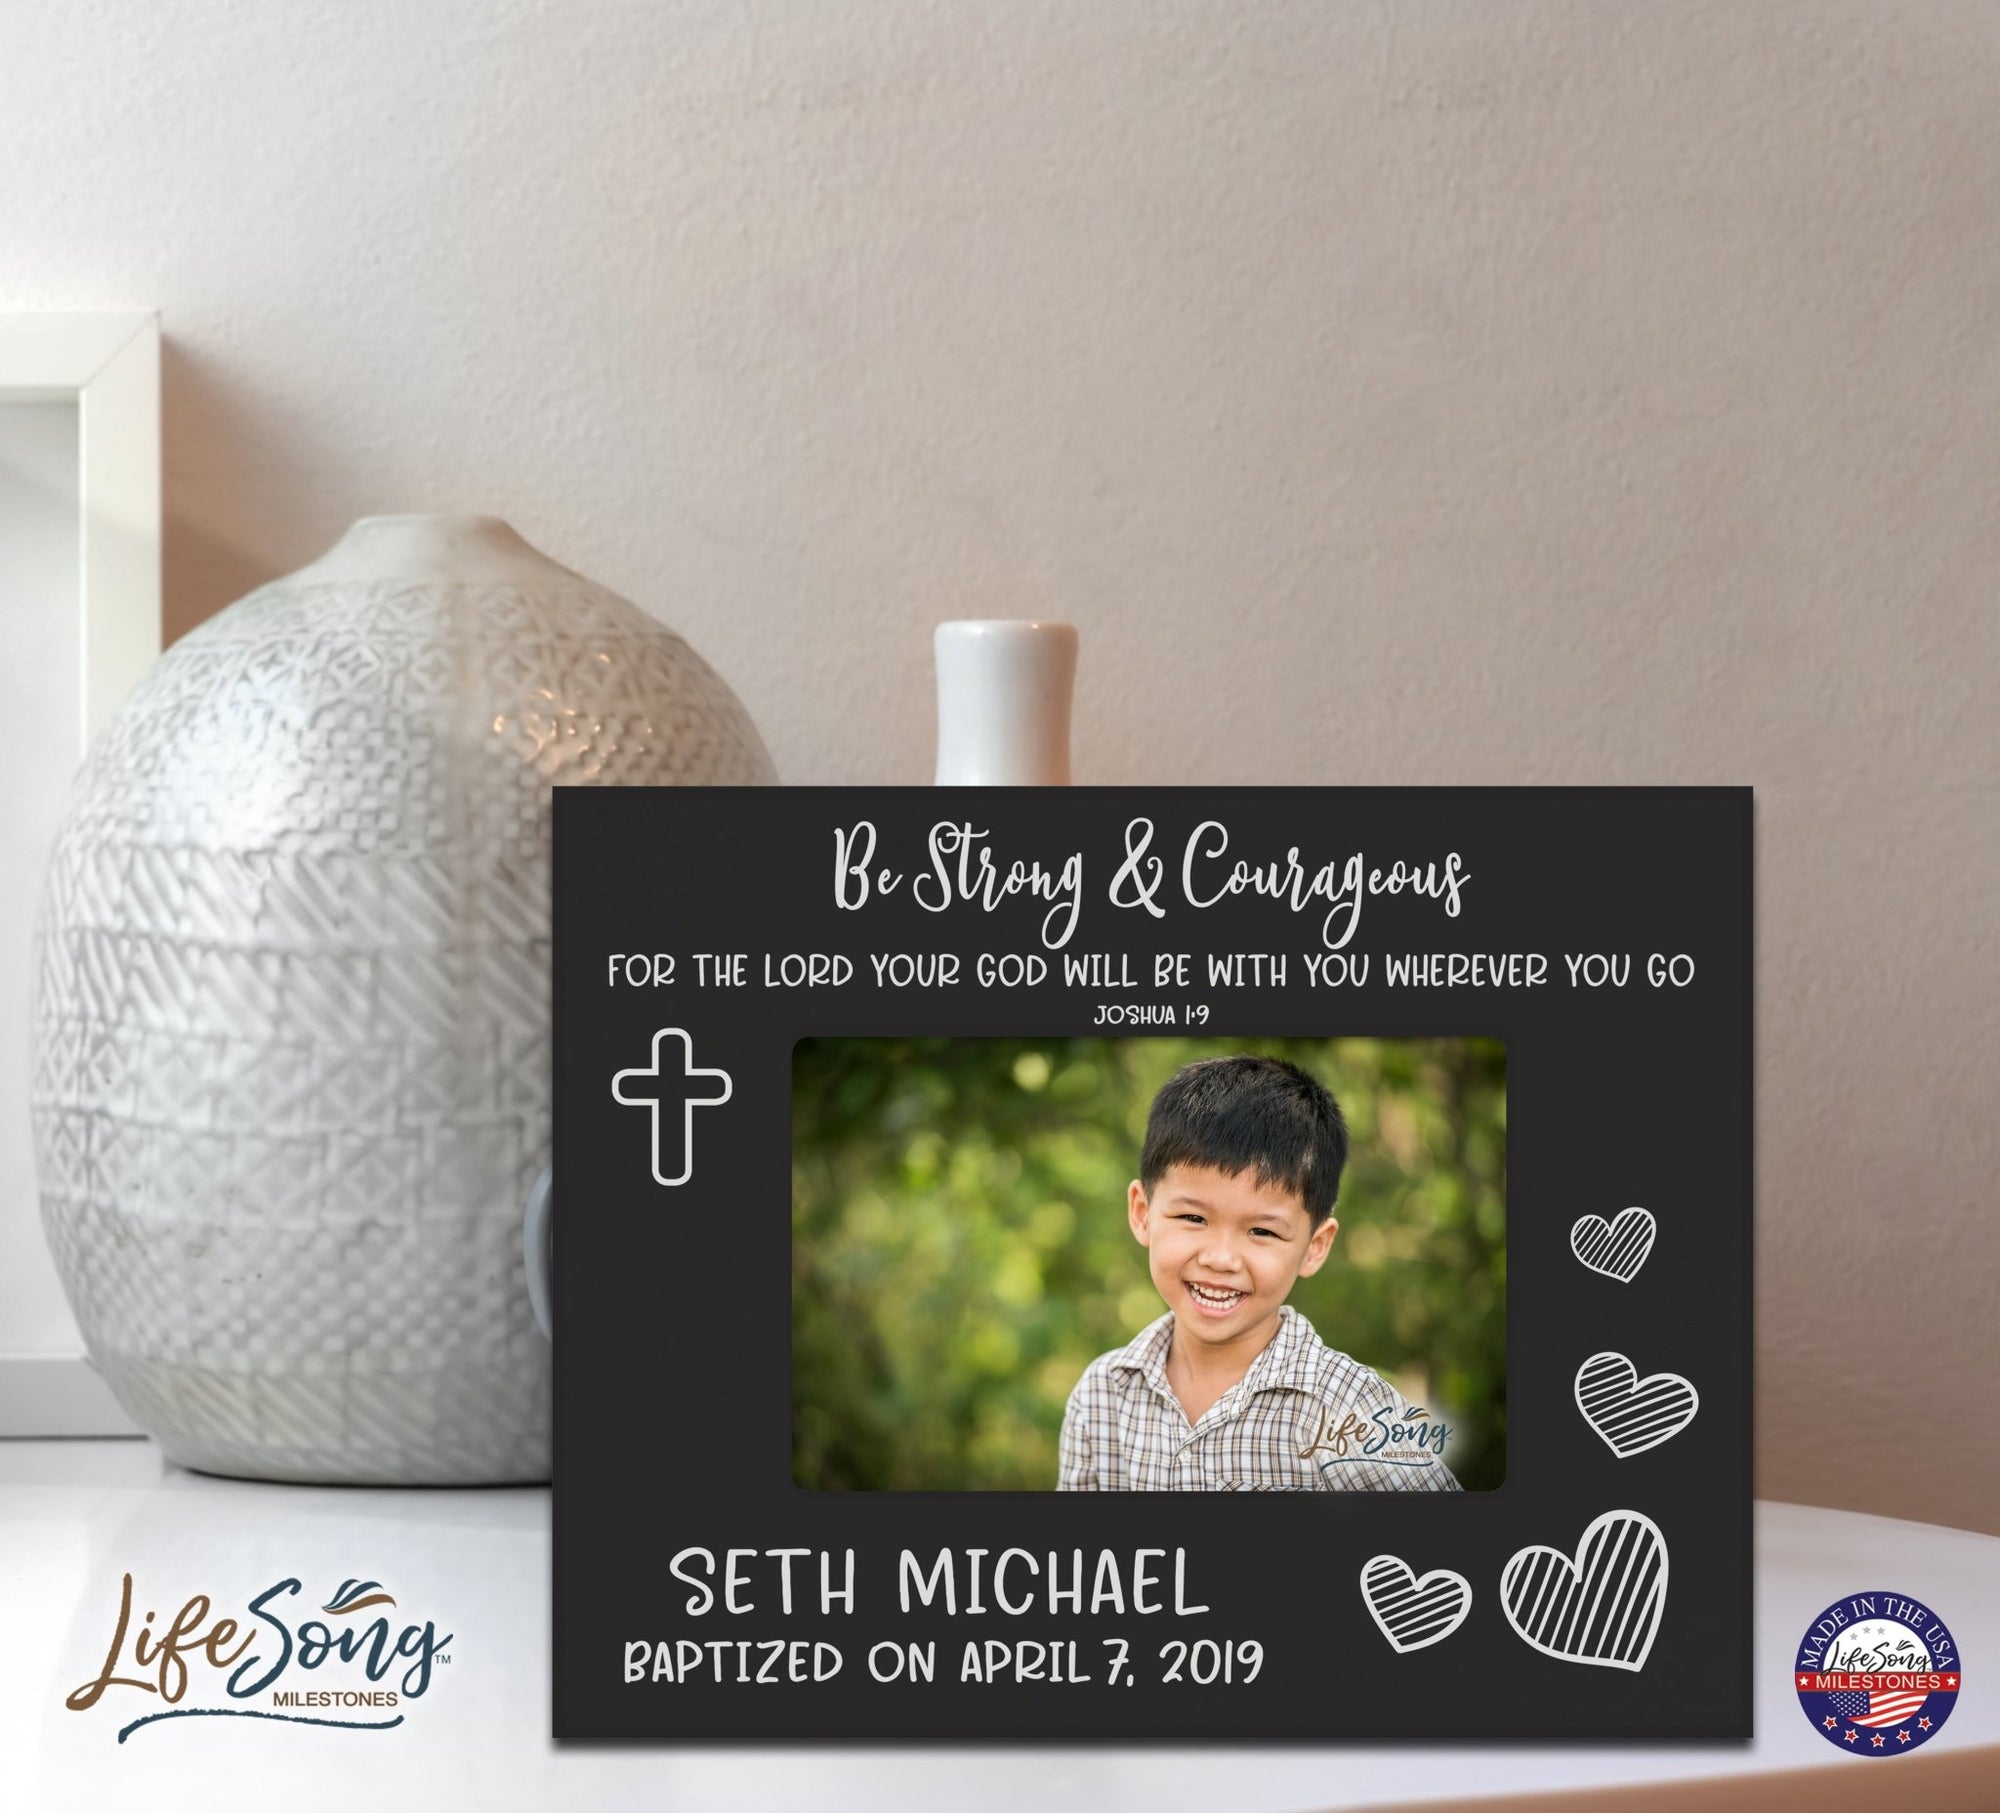 Personalized Baptism Blessing Frame Gift For Child - Be Strong & Courageous - LifeSong Milestones